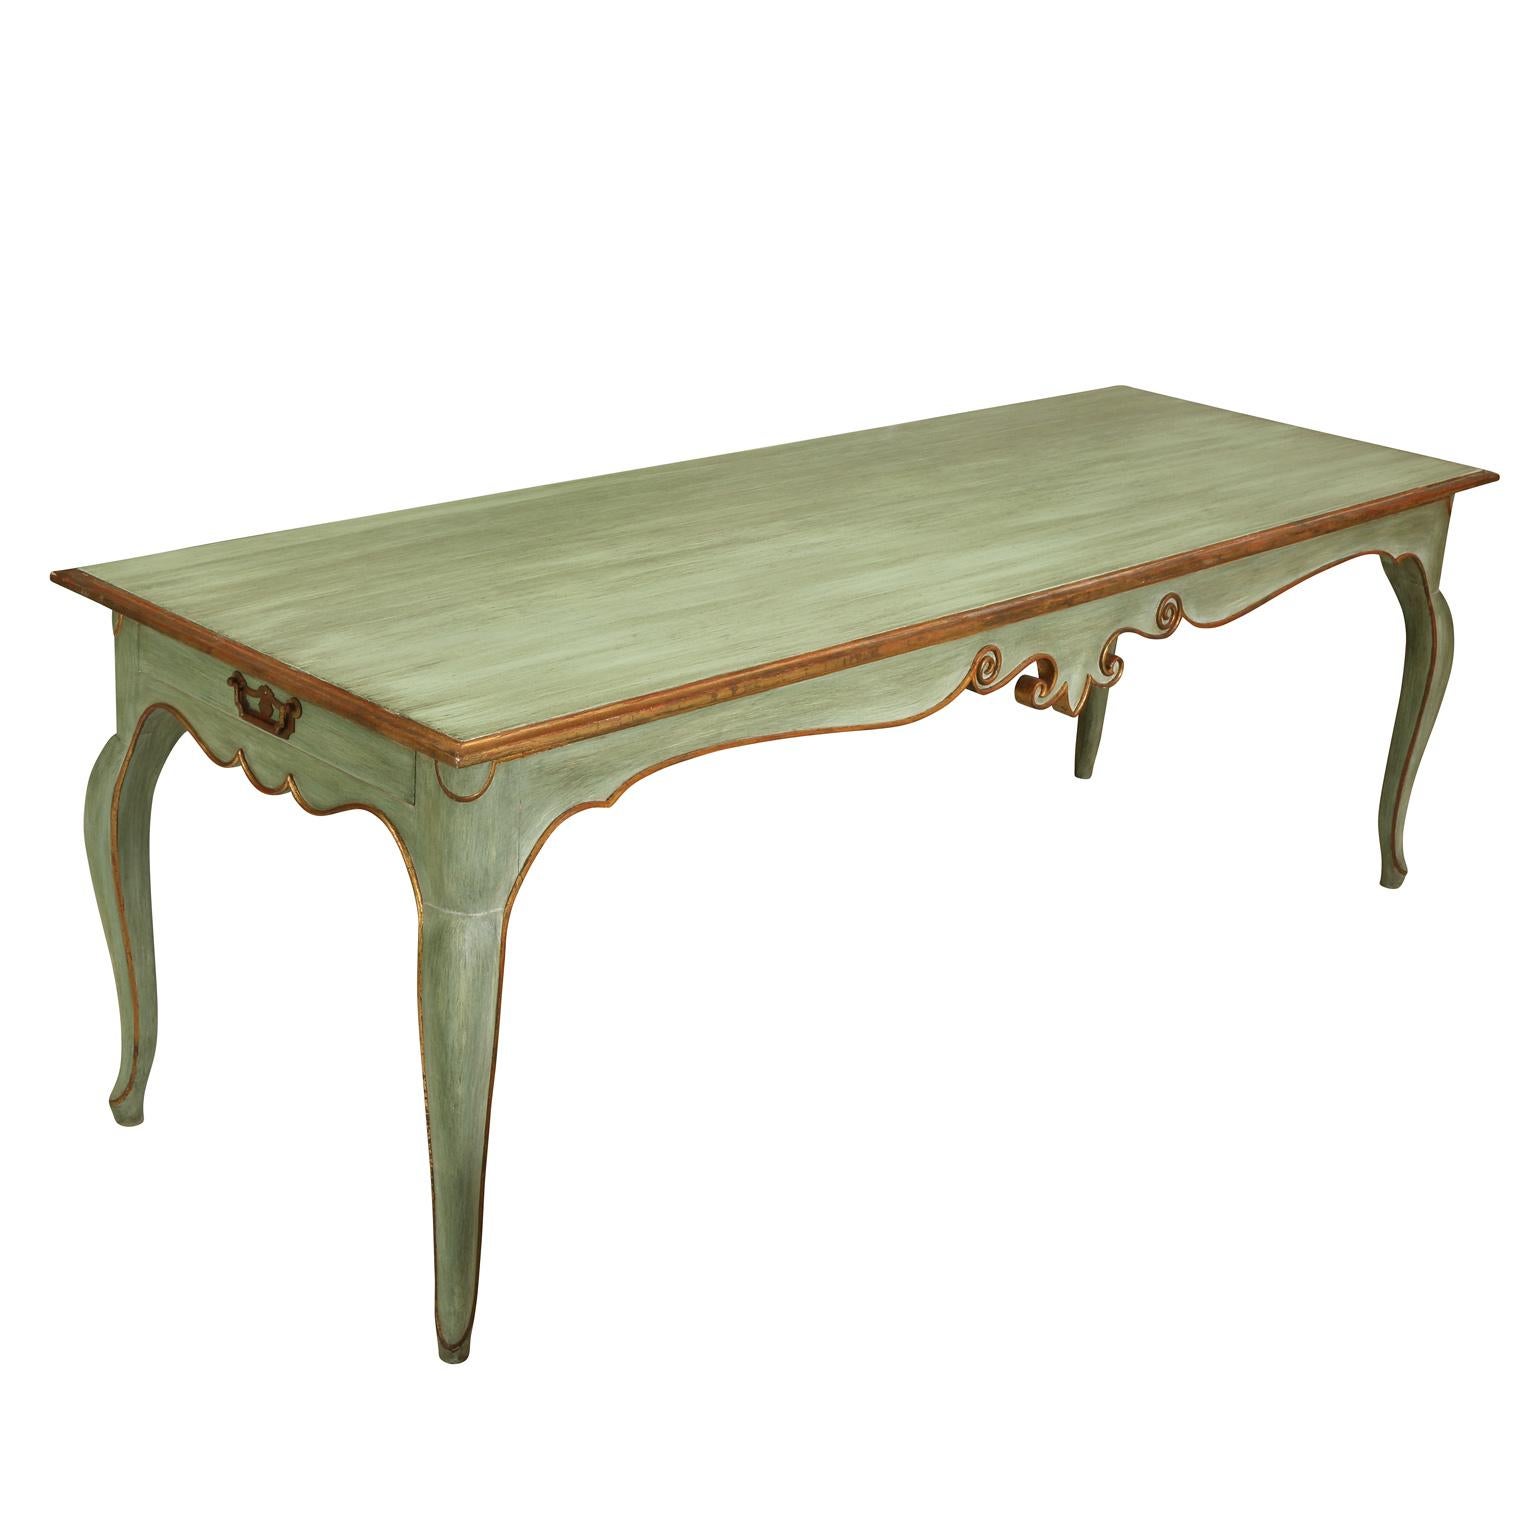 A super chic European style dining/console table with gilt painted trim and details and Cabriole legs. Whether it's a console table or a dinging table, this multifunctional table is a great addition to your home.